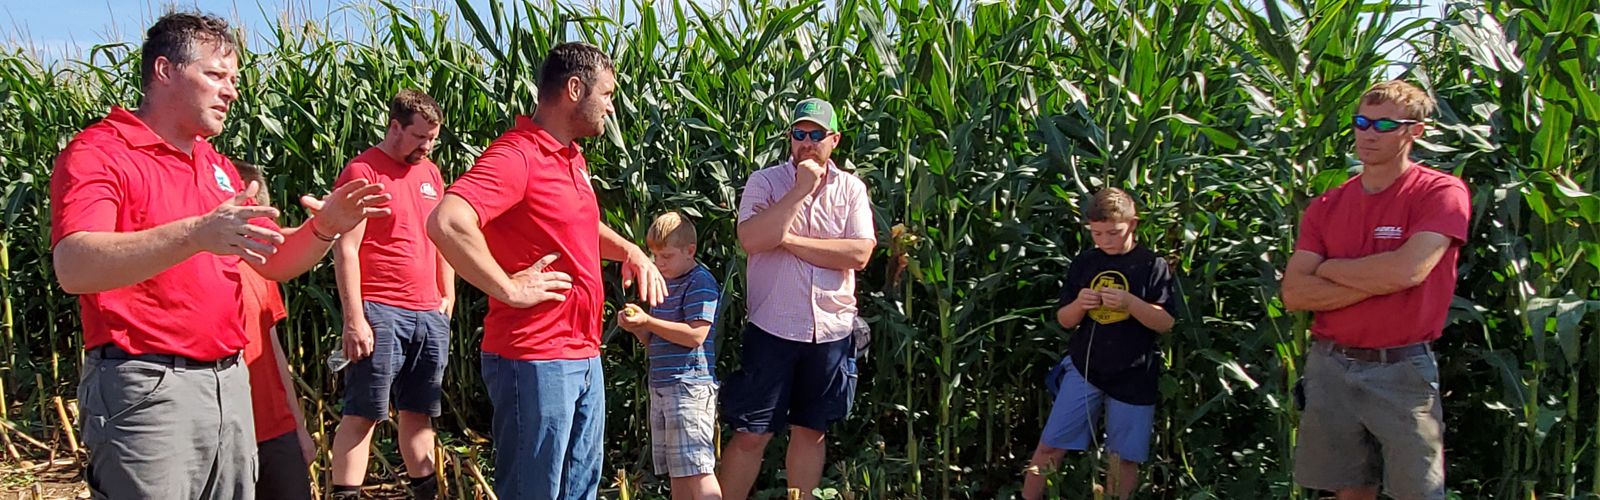 Several men and boys stand in an opening in a corn field, which has been partially harvested, listening to a man in a red shirt talk.